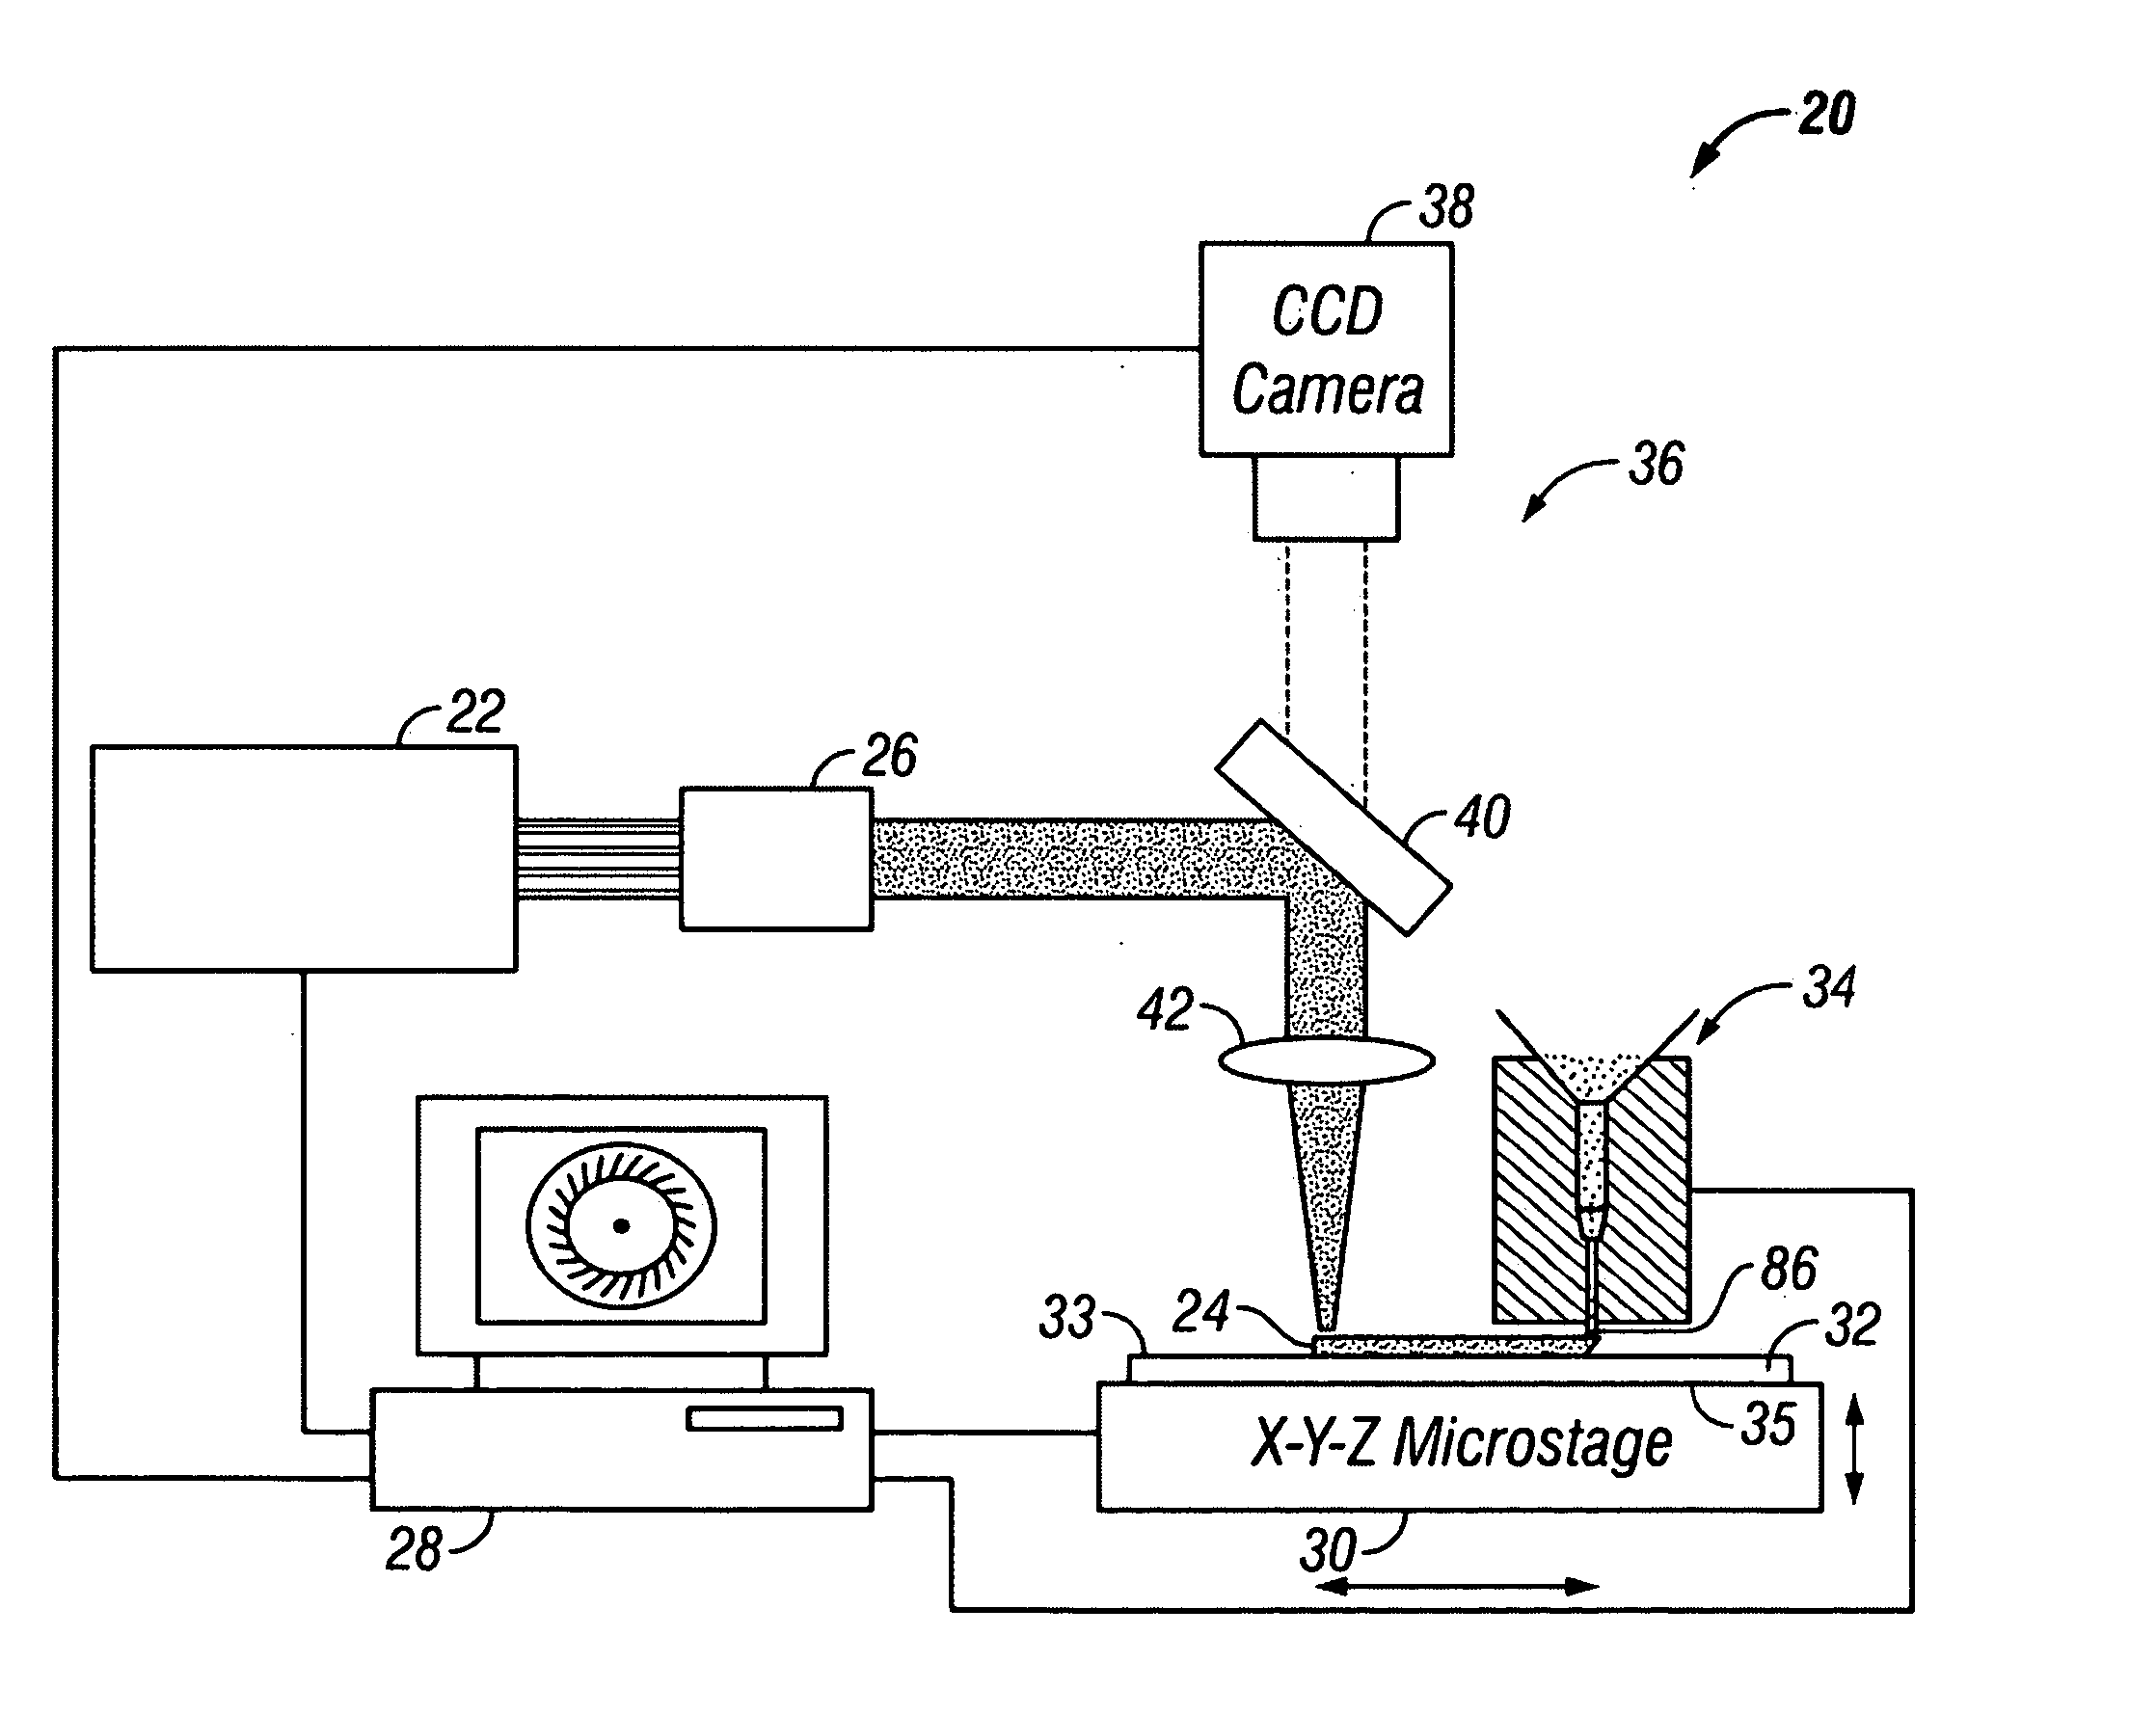 Apparatus and method of dispensing small-scale powders